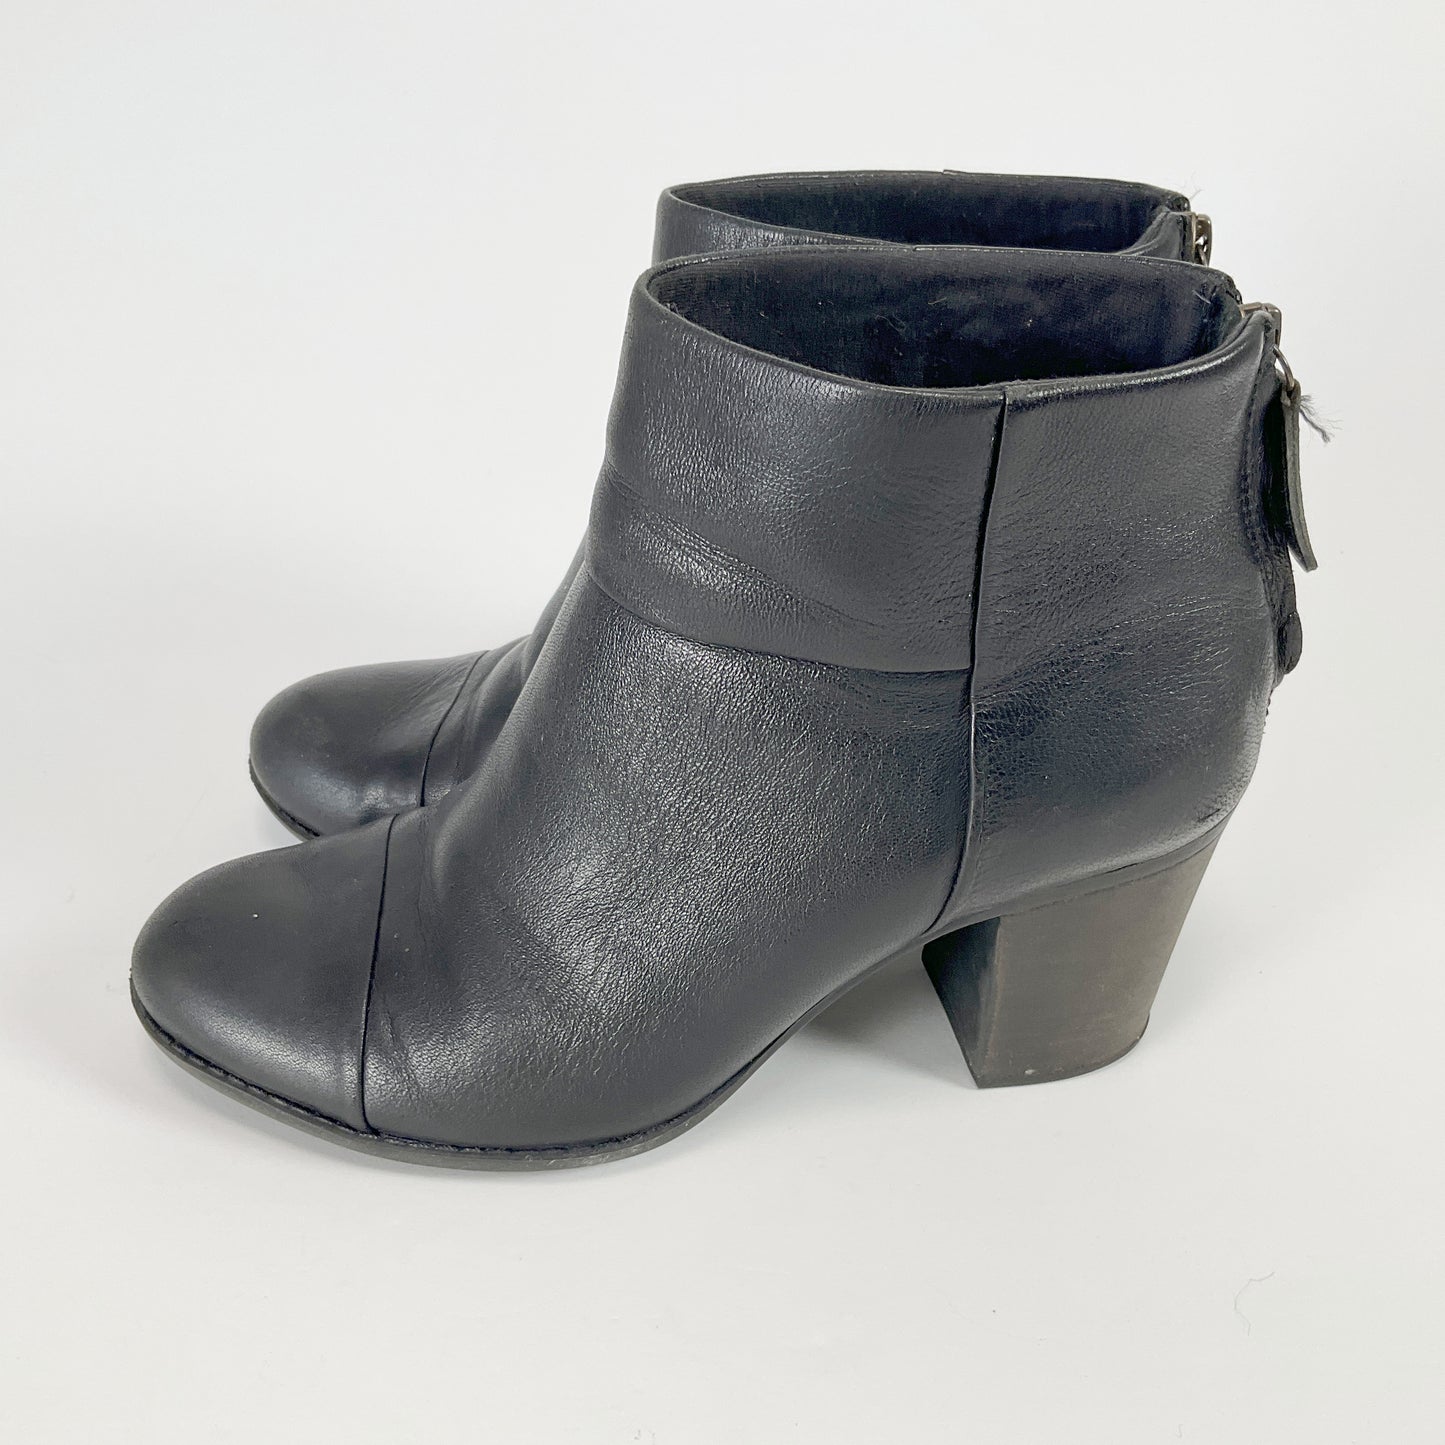 Clarks - Enfield Tess Women Black Leather Zip Ankle Boots